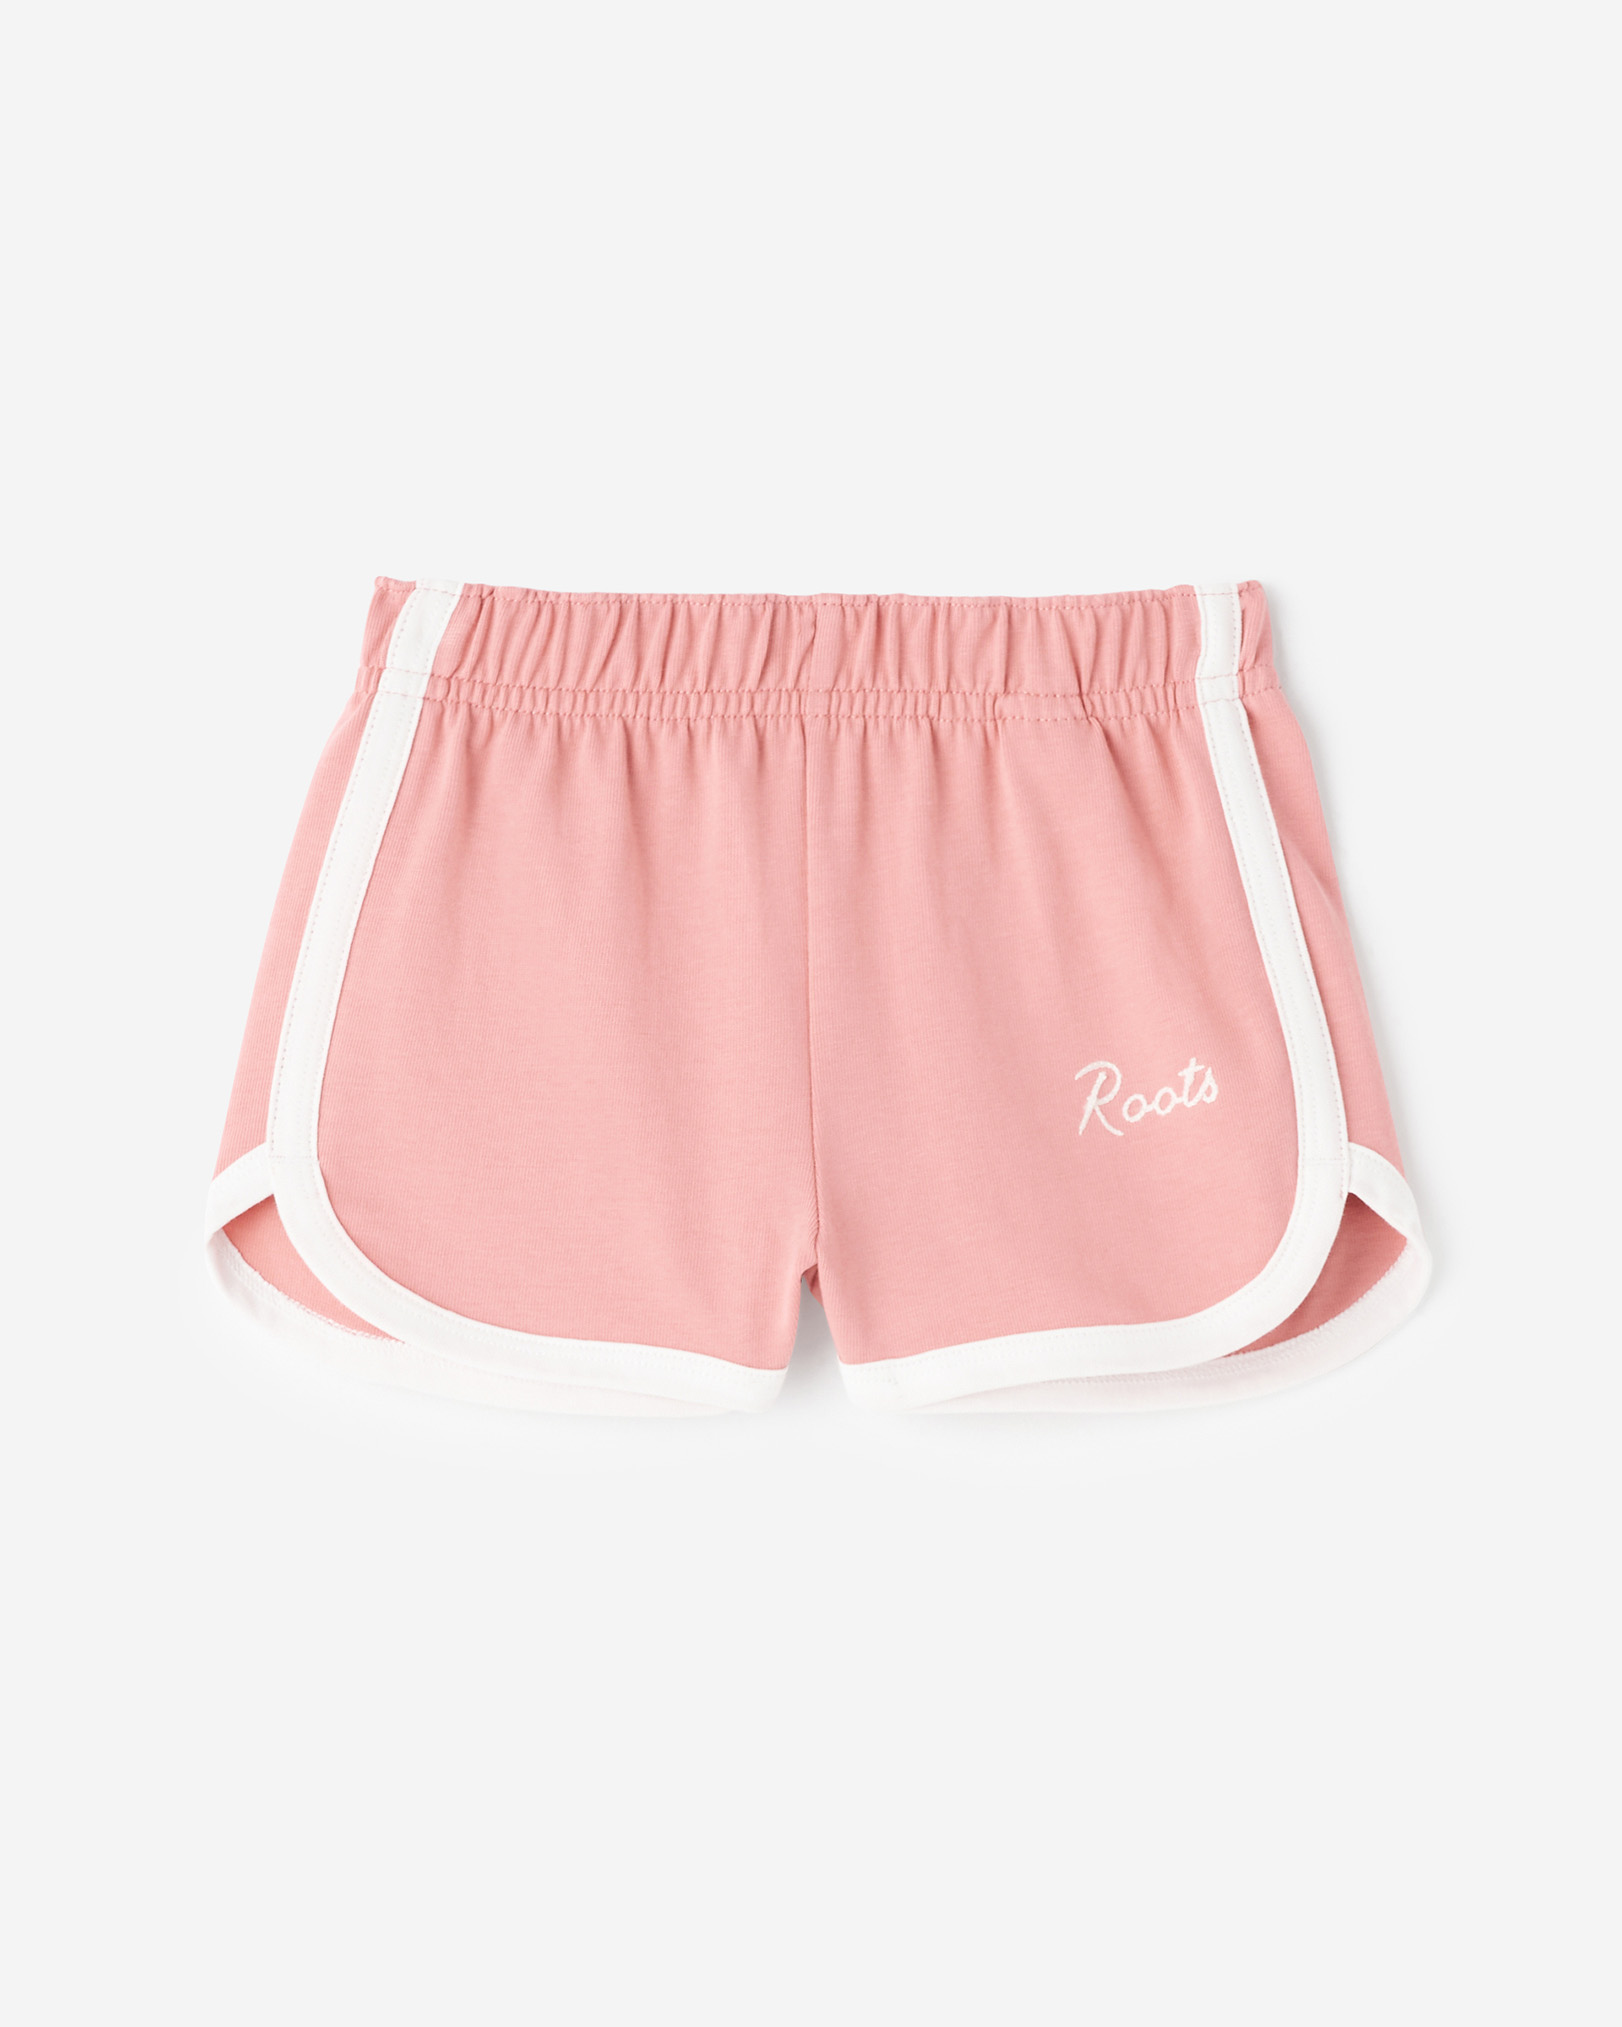 Roots Toddler Girl's Gym Short in Mauveglow